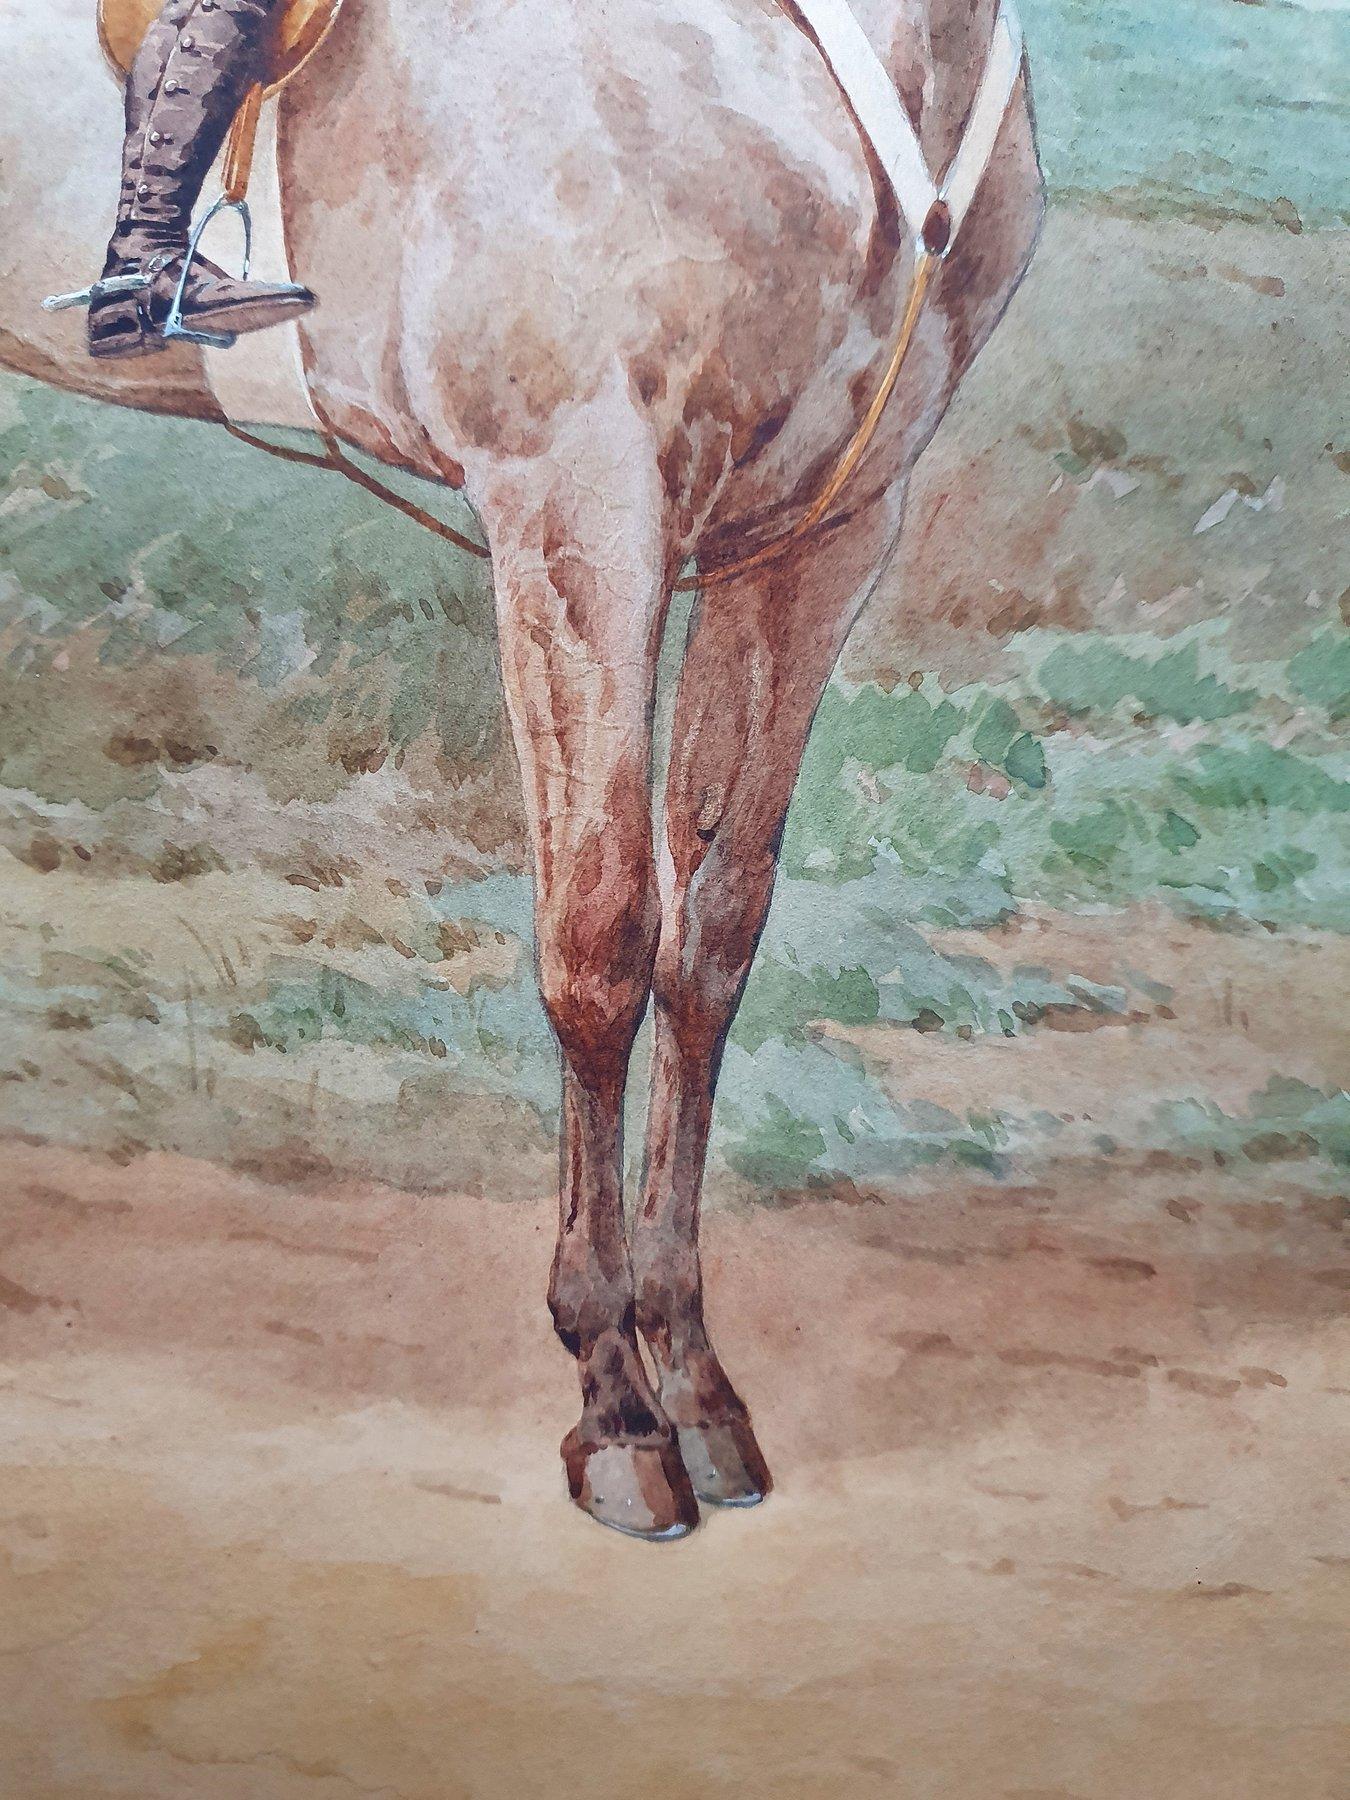 Very fine watercolour/ gouache from the French artist Charles Fernand de Condamy ( 1847-1913) . 
Condamy was a specialist in hunting subjects and equestrian portraits. He was an extremely gifted animal painter. This work depicts a teenager dressed